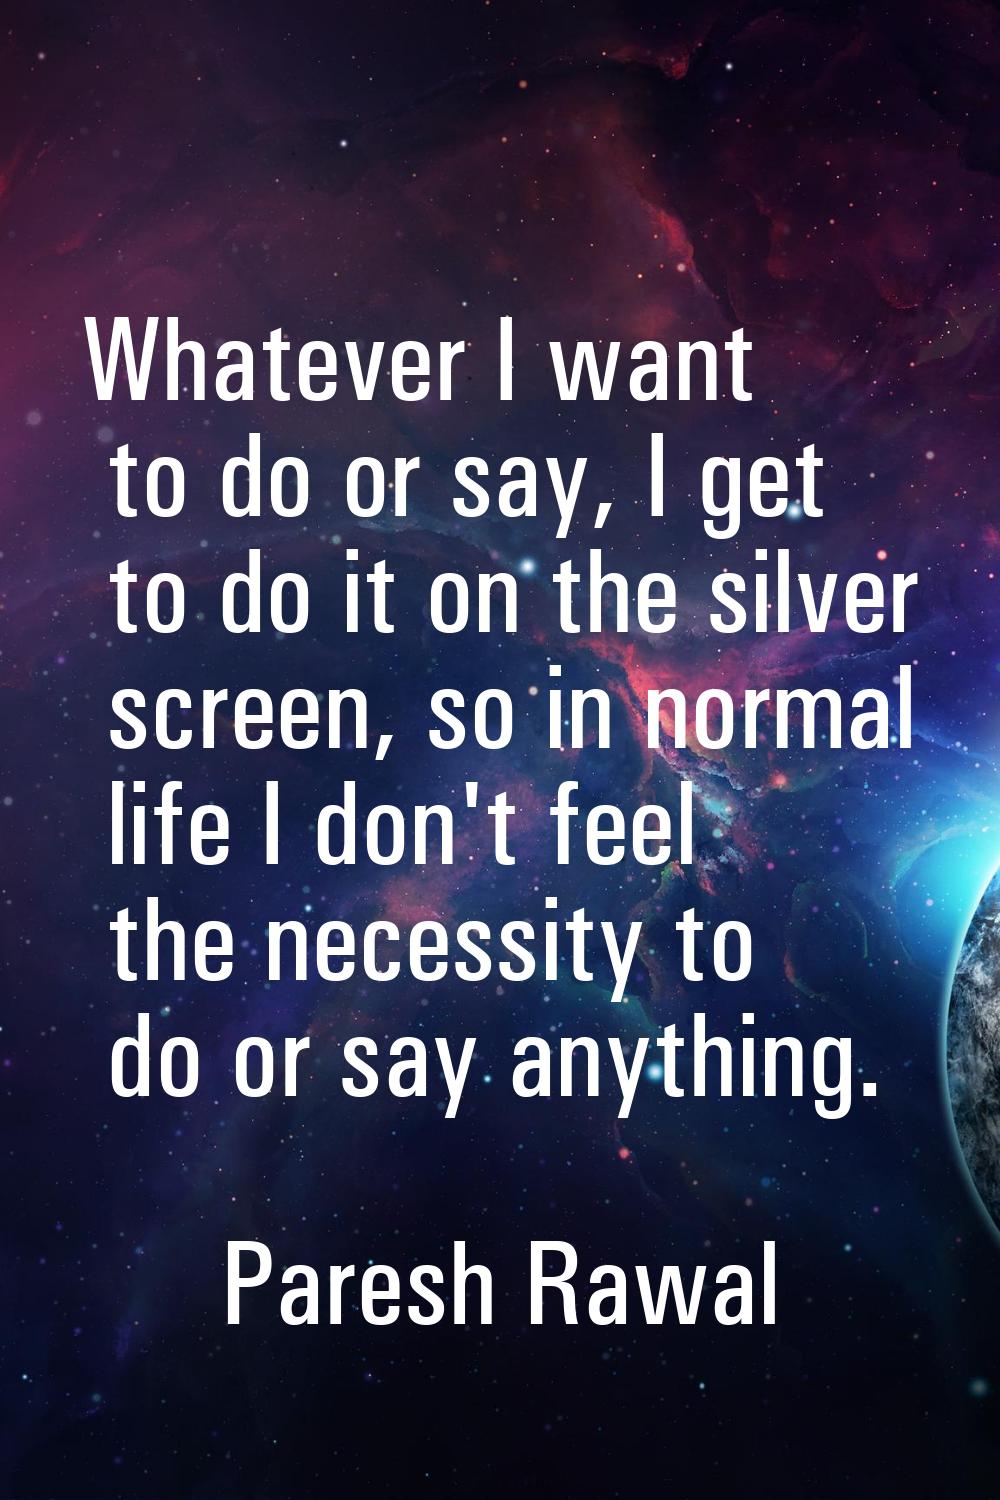 Whatever I want to do or say, I get to do it on the silver screen, so in normal life I don't feel t